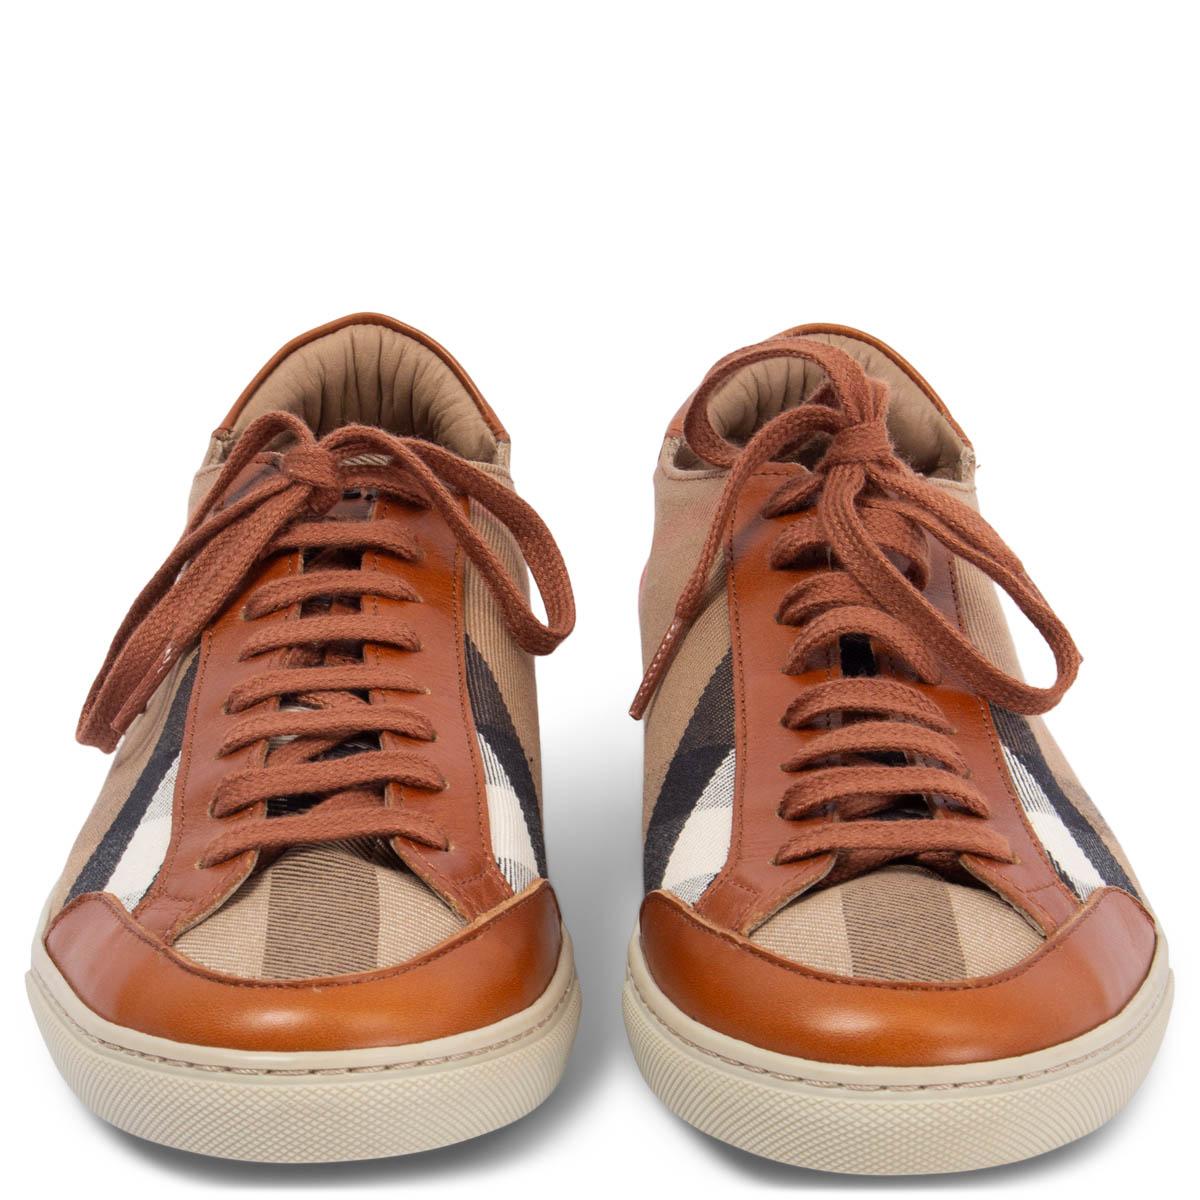 100% authentic Burberry lace-up canvas sneakers in camel, black, red and white calssic check with congac leather trimming. Have been worn and are in excellent condition. 

Measurements
Imprinted Size	39
Shoe Size	39
Inside Sole	26cm